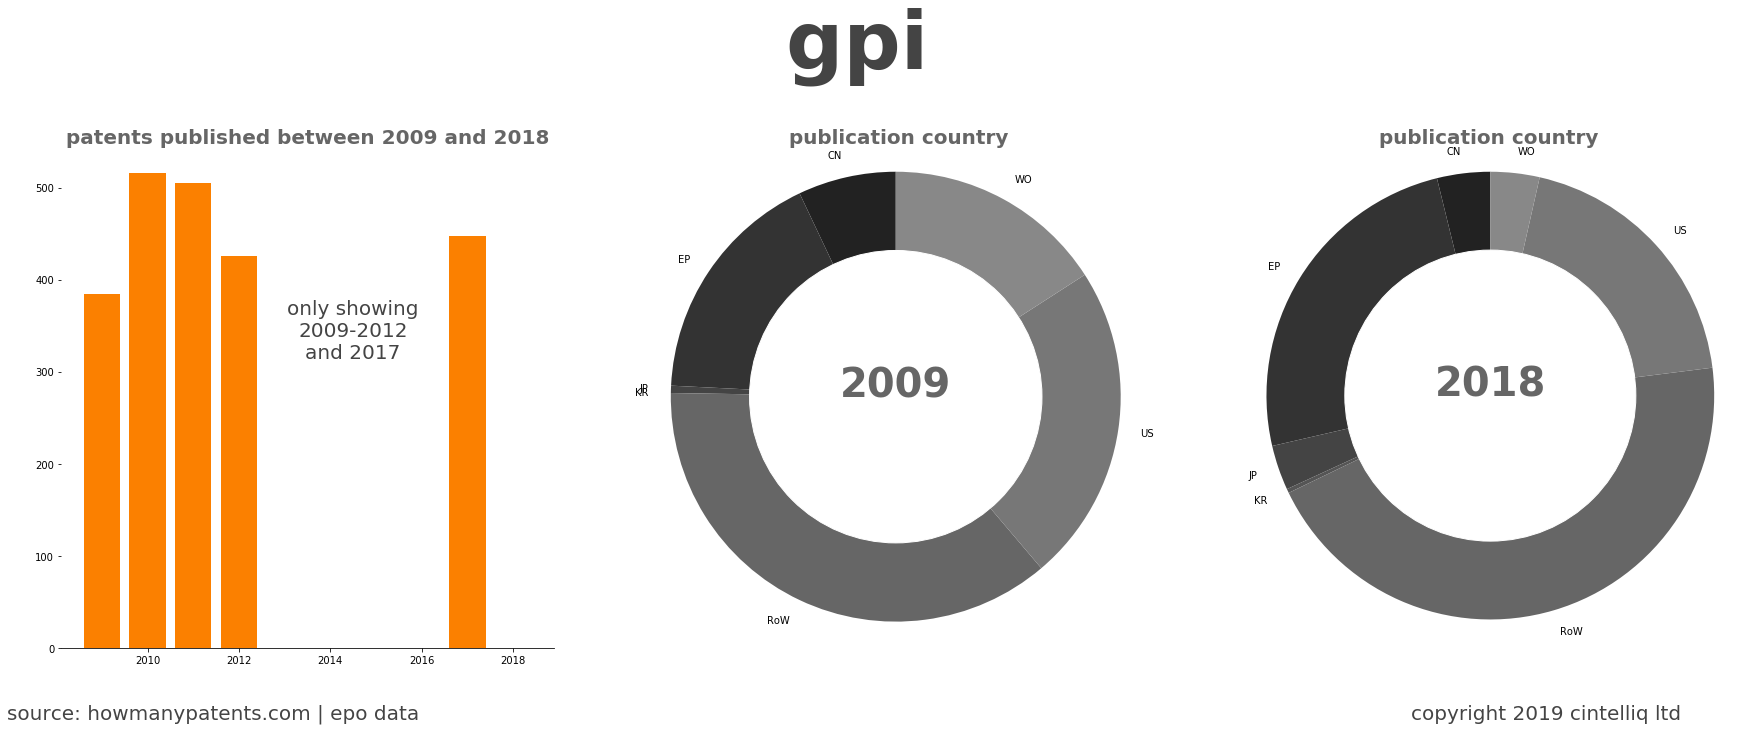 summary of patents for Gpi 